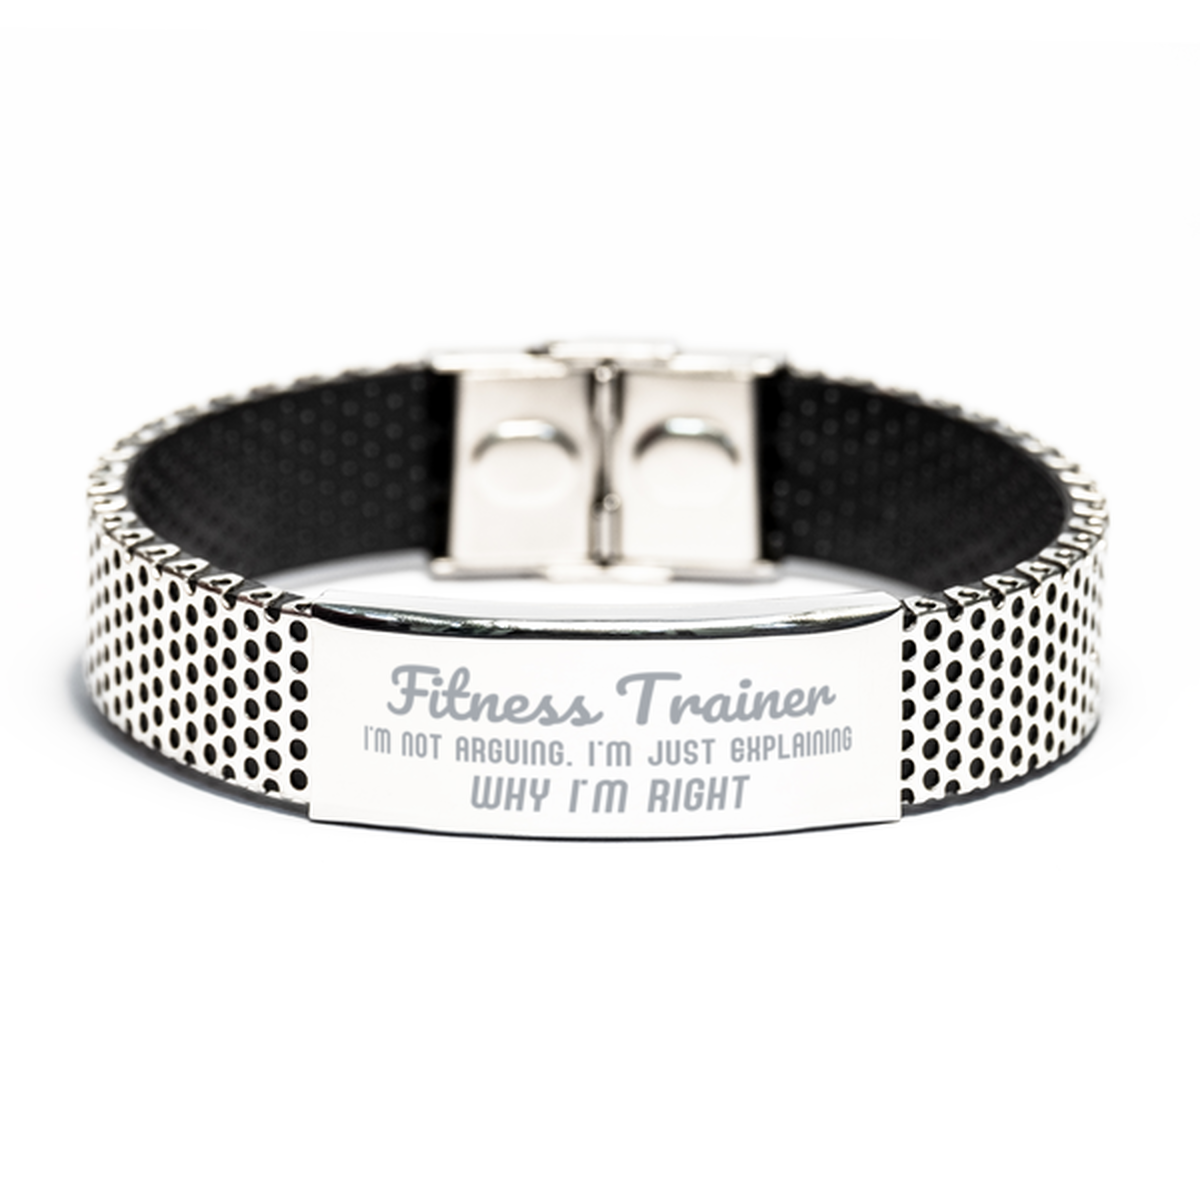 Fitness Trainer I'm not Arguing. I'm Just Explaining Why I'm RIGHT Stainless Steel Bracelet, Funny Saying Quote Fitness Trainer Gifts For Fitness Trainer Graduation Birthday Christmas Gifts for Men Women Coworker